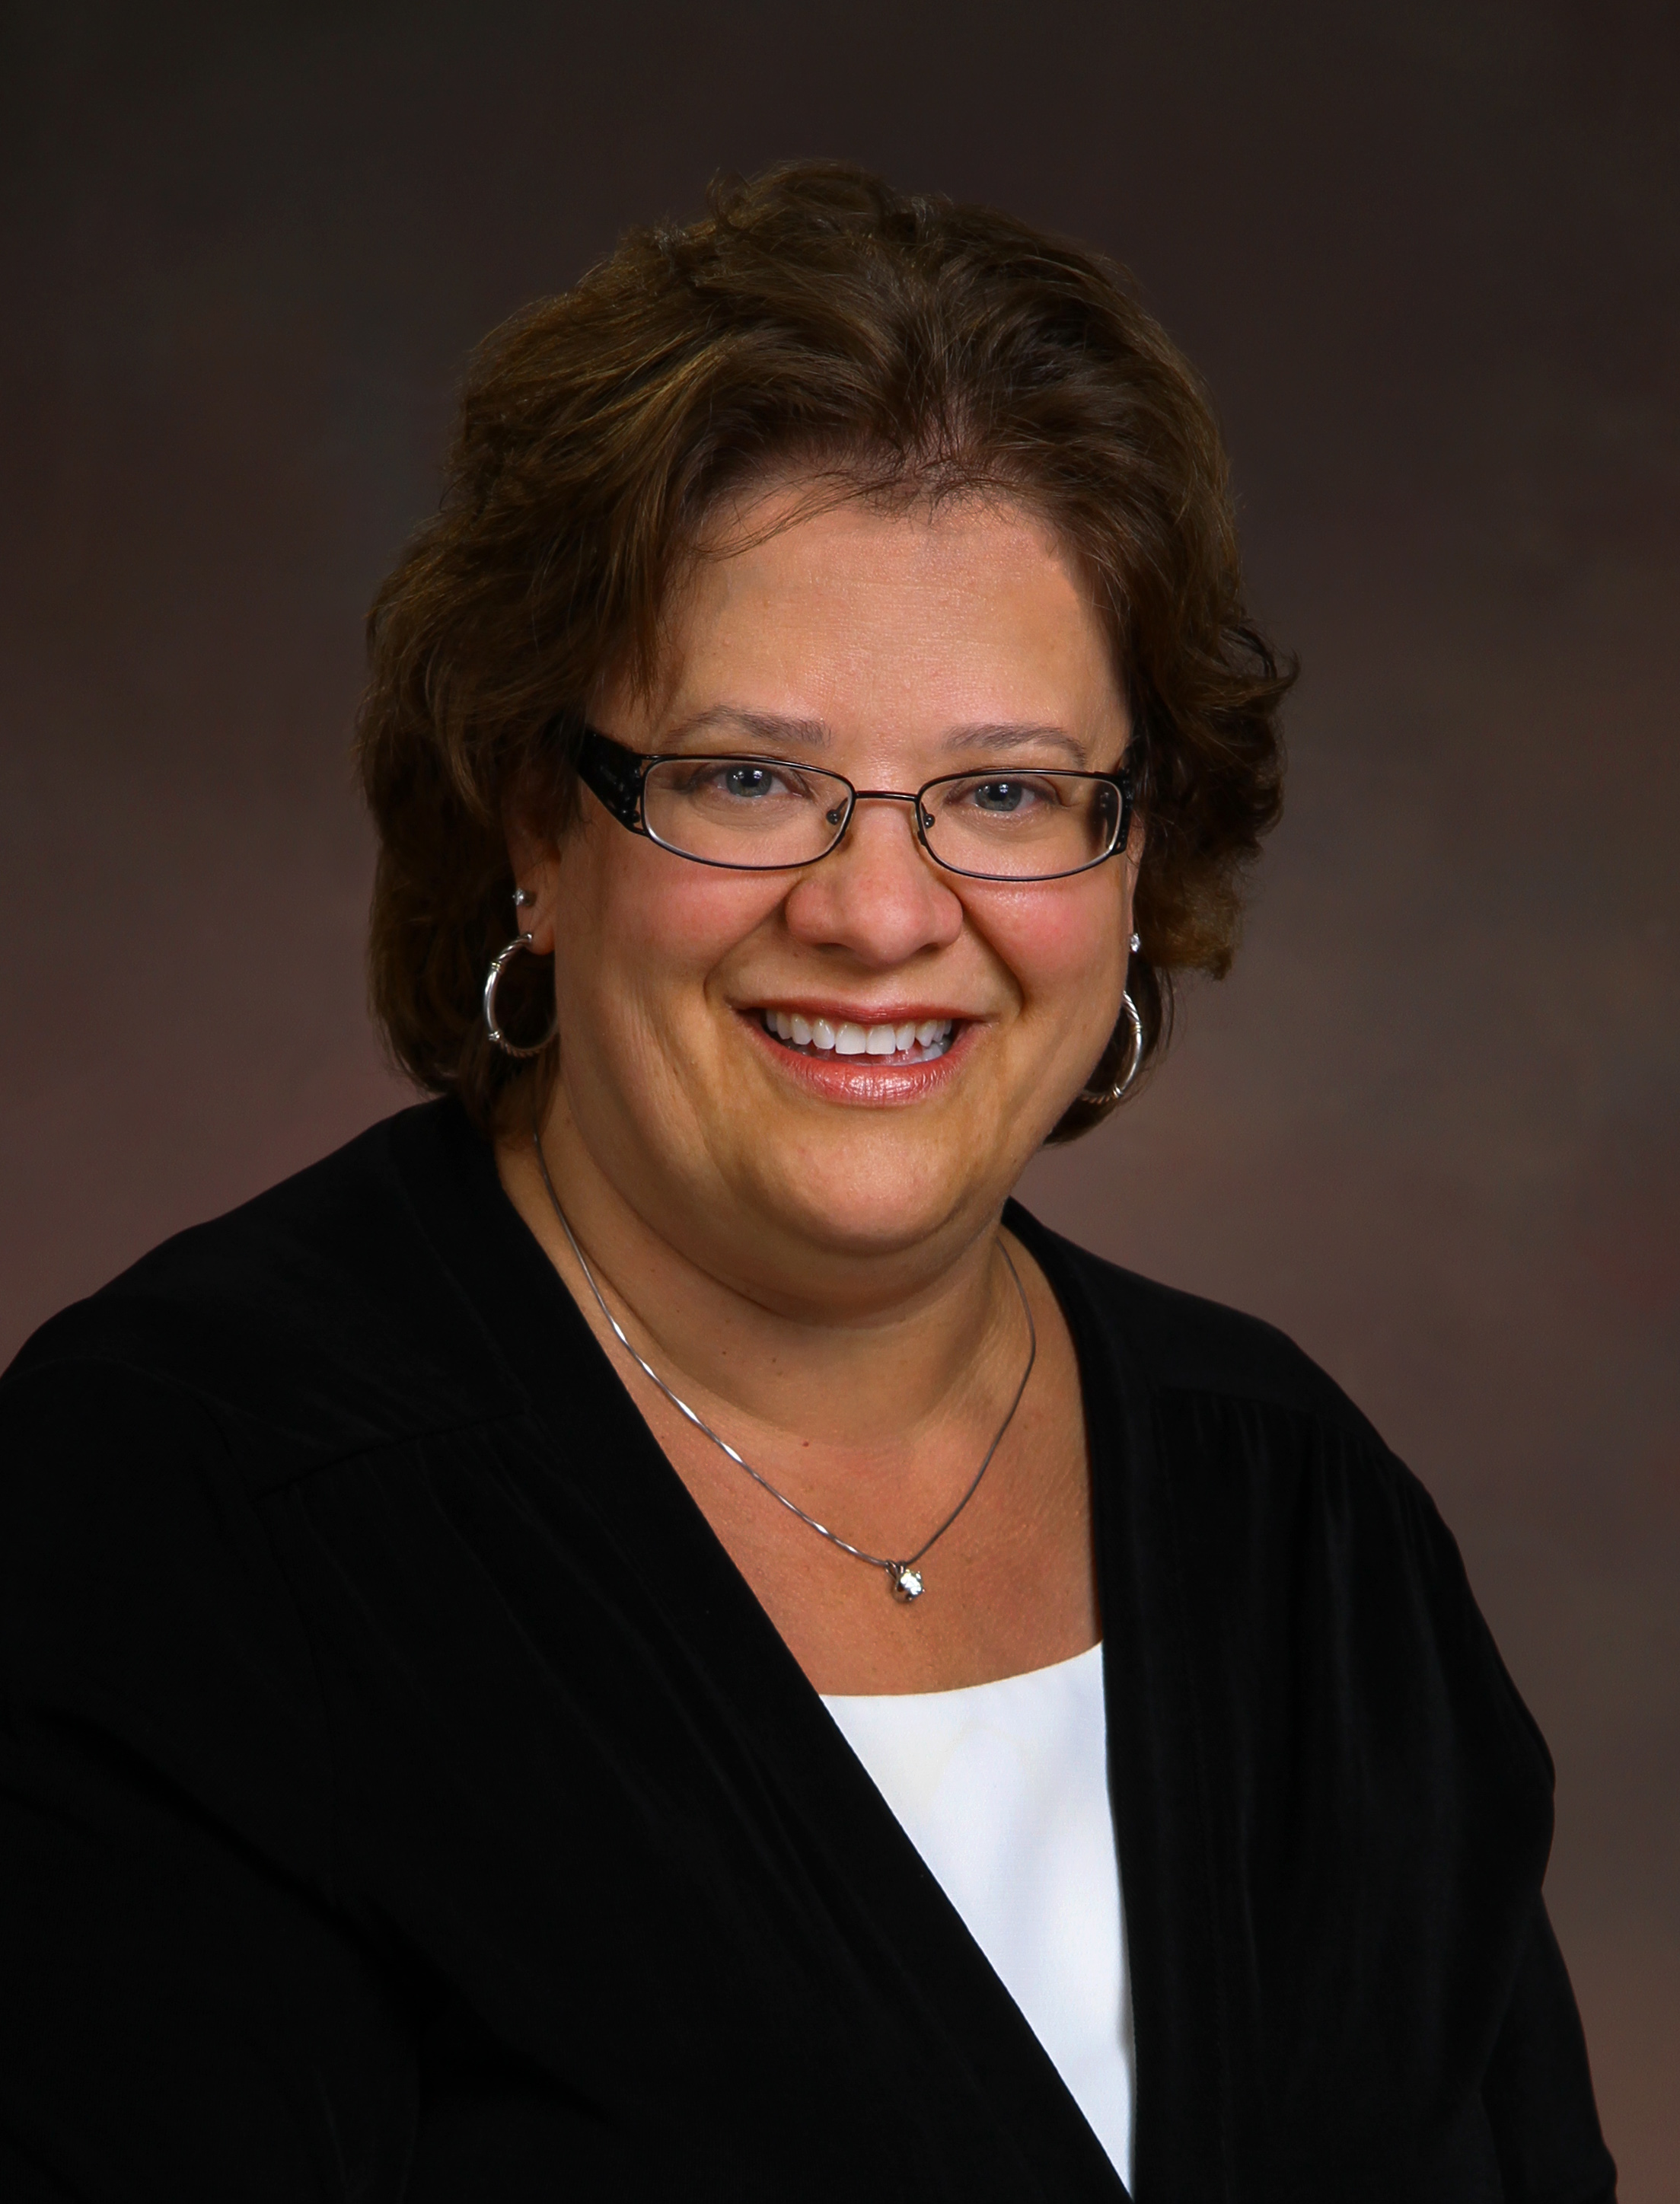 Lynne Coy-Ogan, Ed.D., is the senior vice president for academic affairs and provost at Husson University.